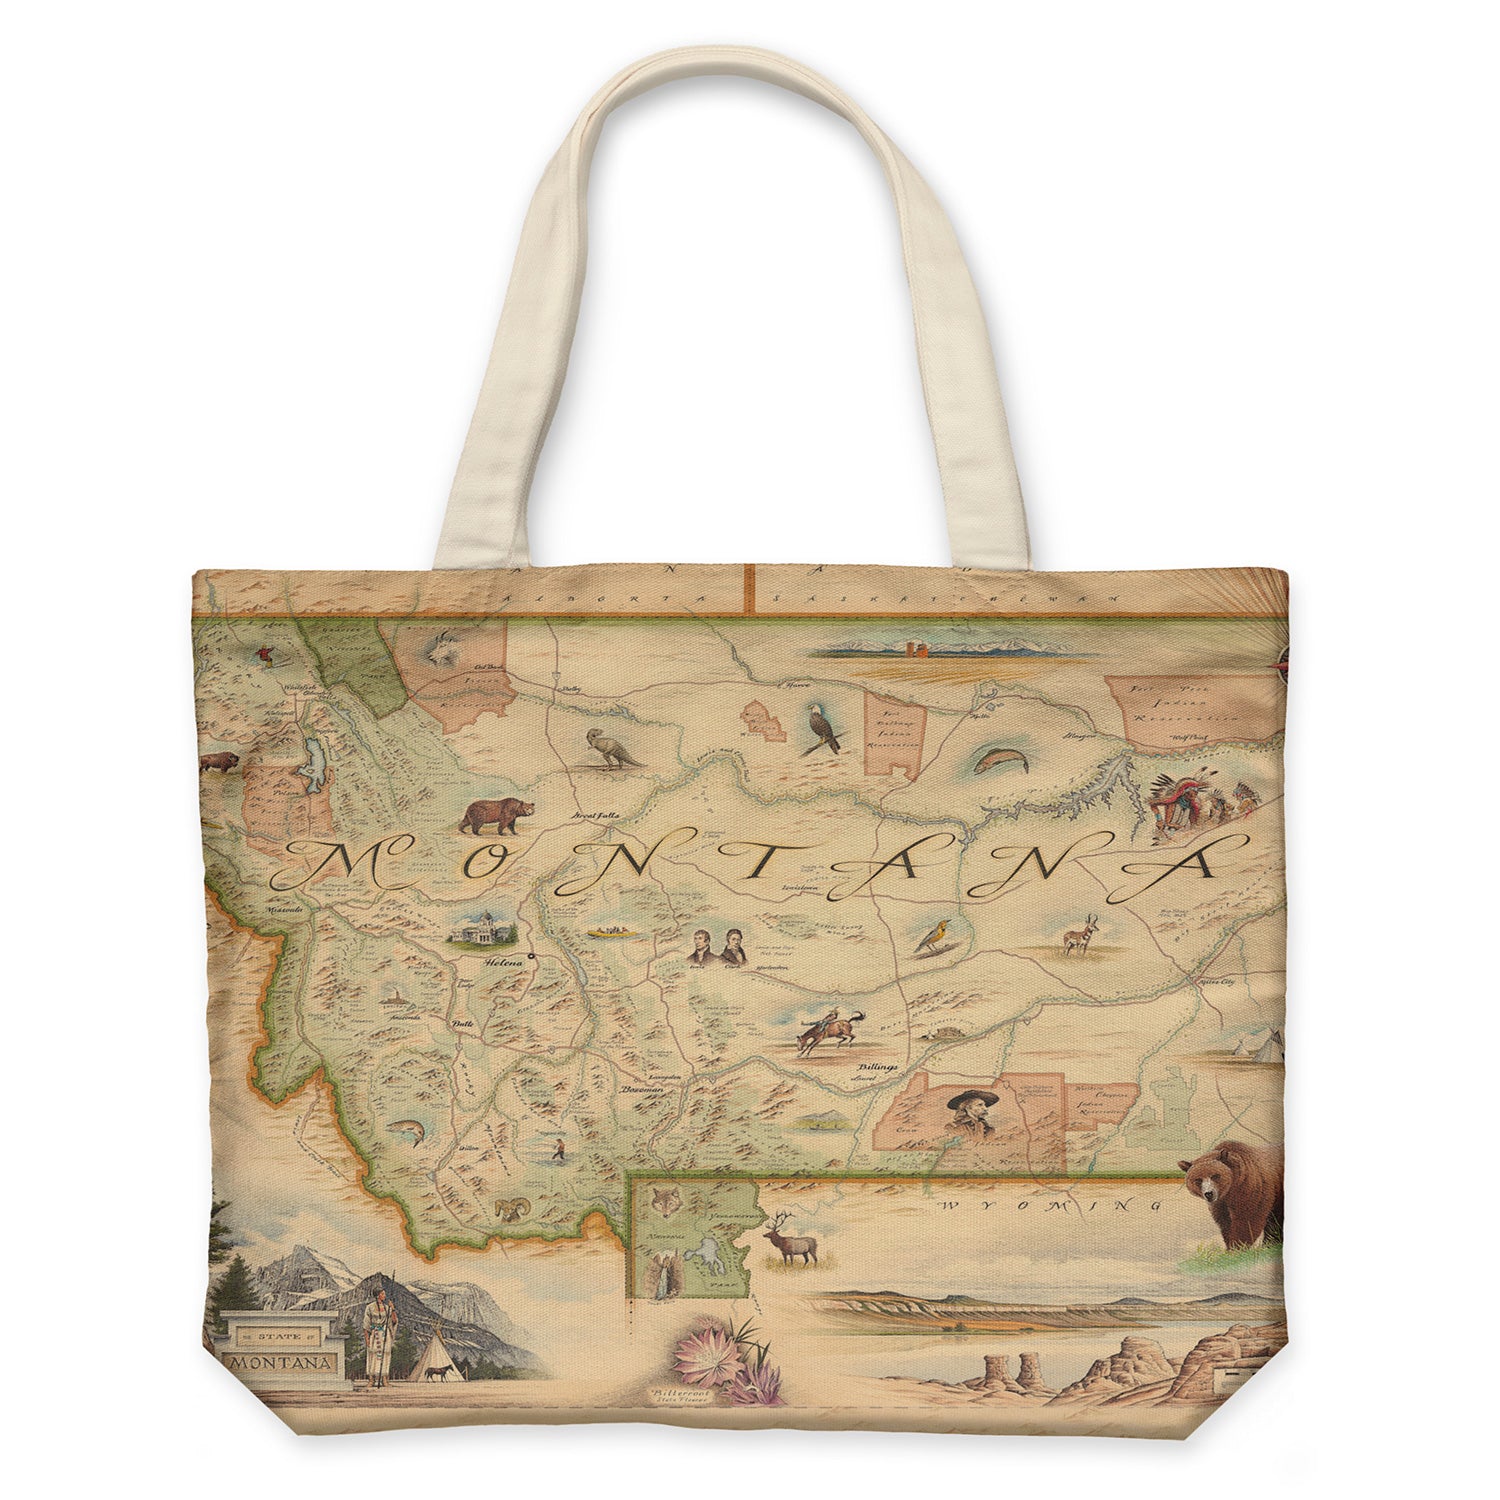 Montana State Map Canvas Tote Bag by Xplorer Maps.  The map is featuring Sacajawea, Lewis & Clark, Yellowstone, Glacier National Park, Flathead Lake, grizzly bear, bald eagle, and elk. Cities like Missoula, Bozeman, Helena, and Whitefish are included in the print. 